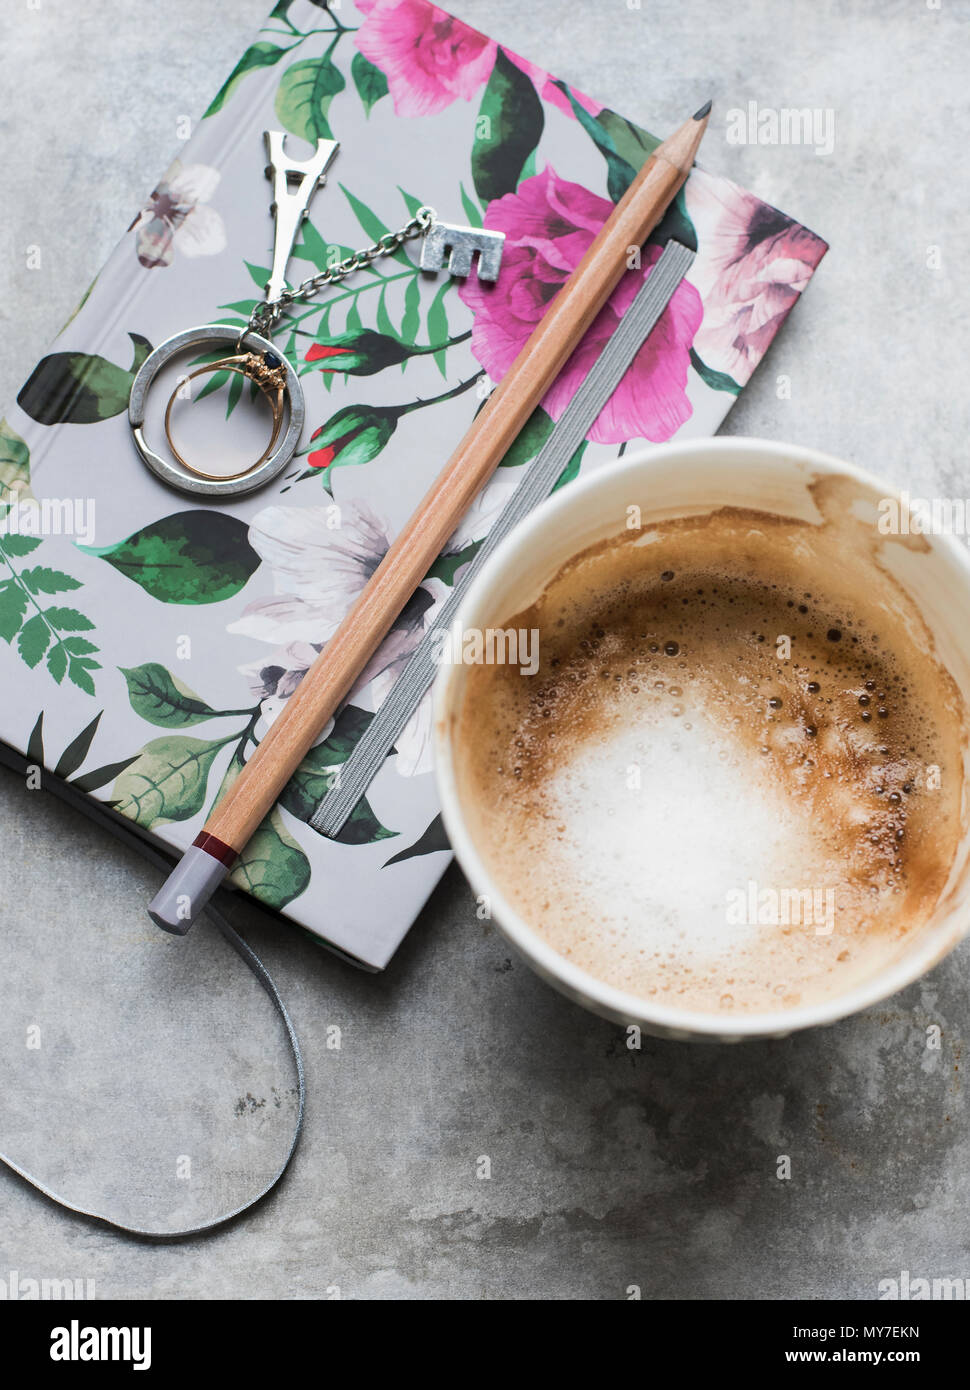 Cup of coffee with notebook and pencil, overhead view Stock Photo